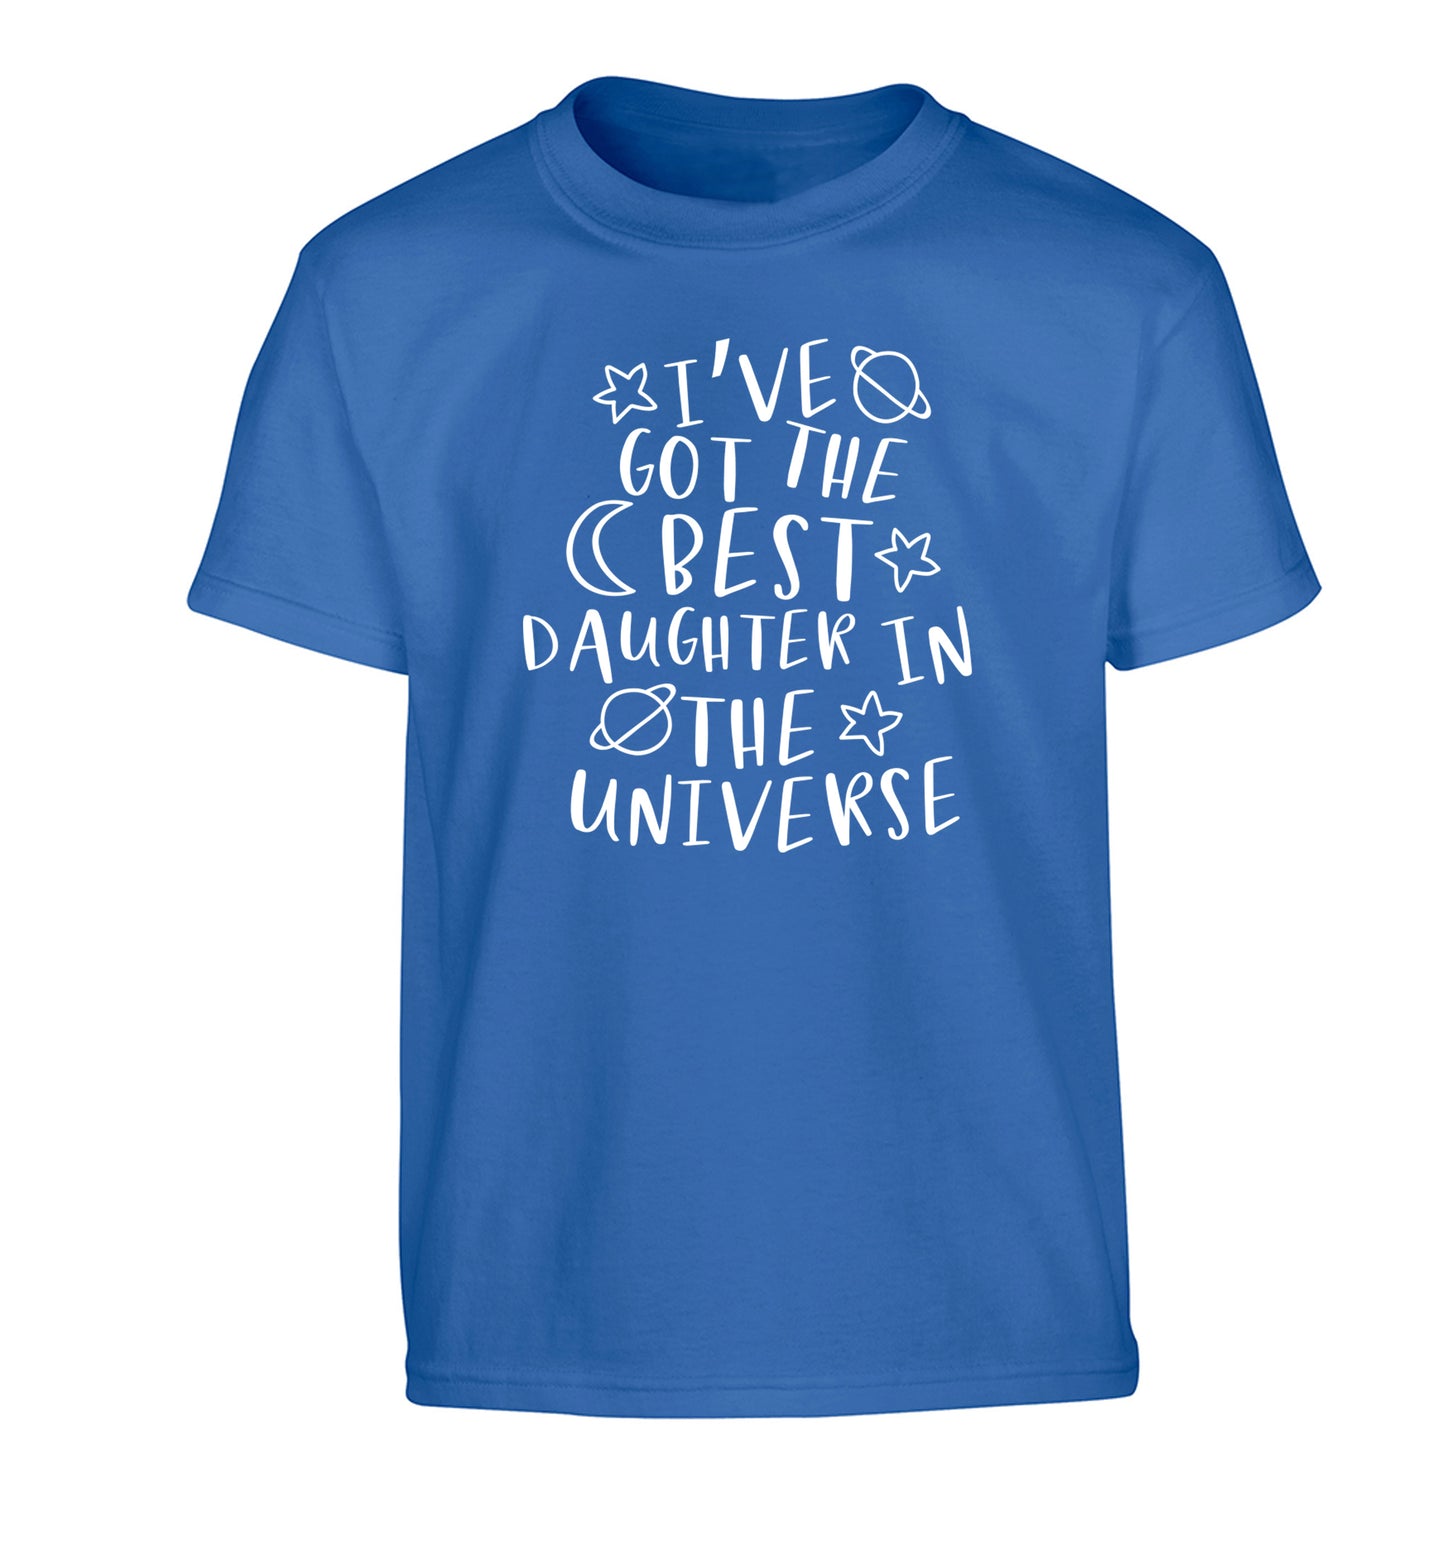 I've got the best daughter in the universe Children's blue Tshirt 12-13 Years